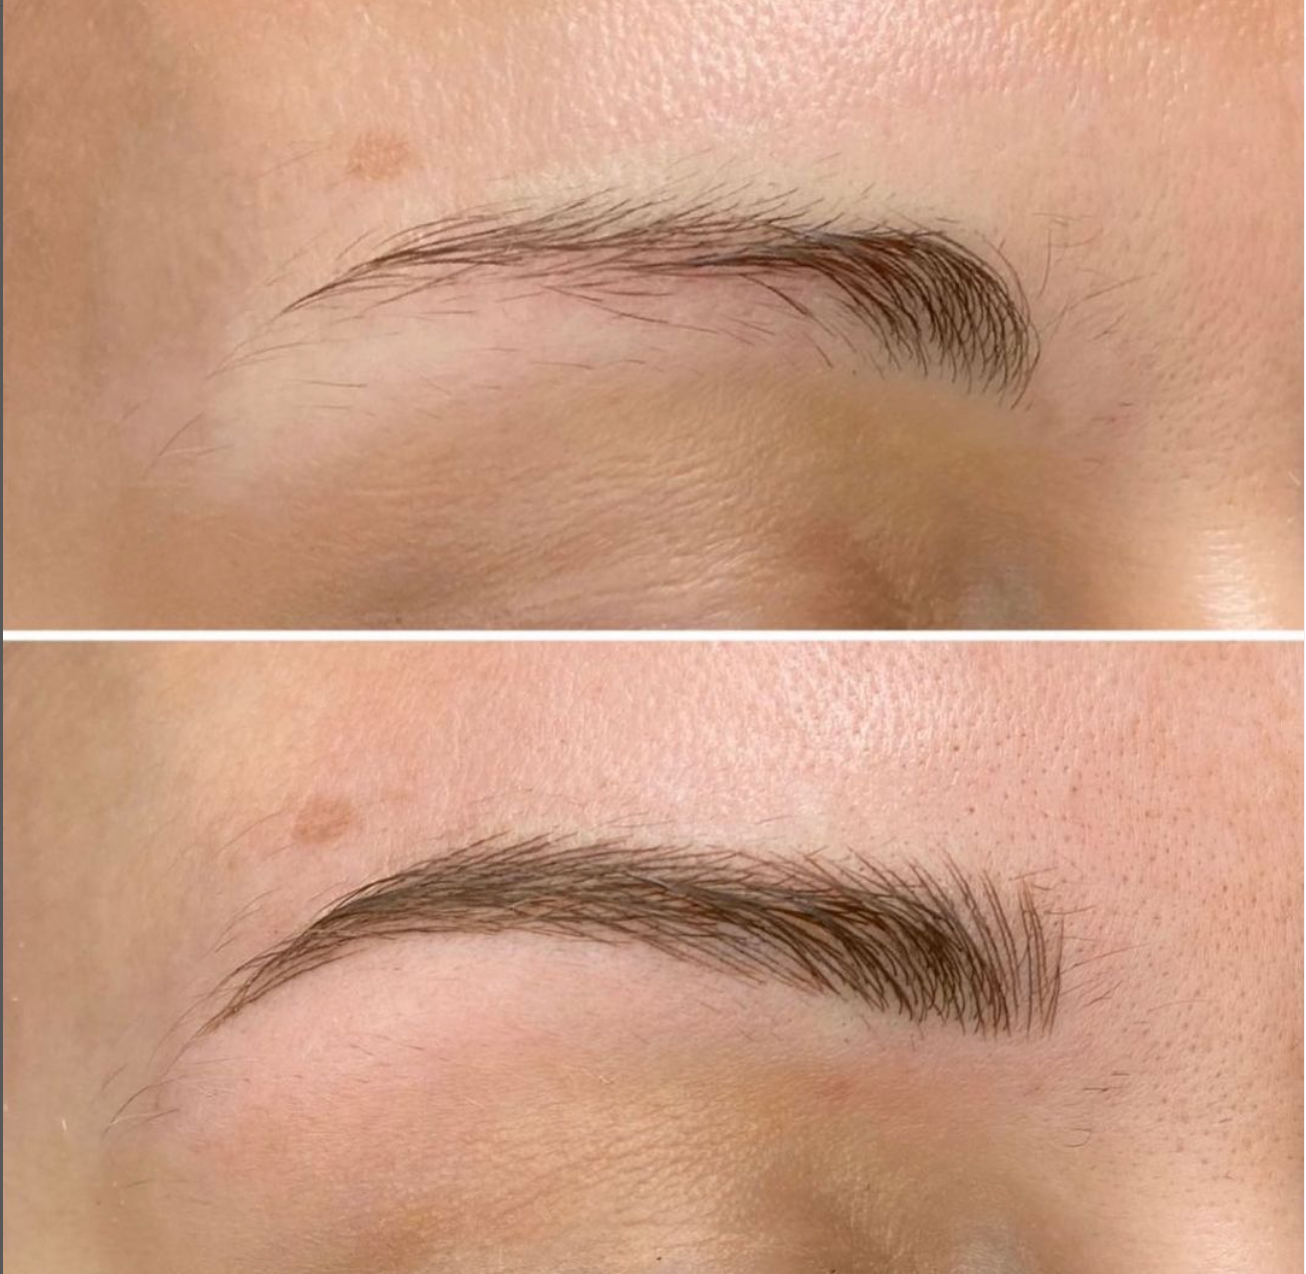 How to Reshape Eyebrows Naturally